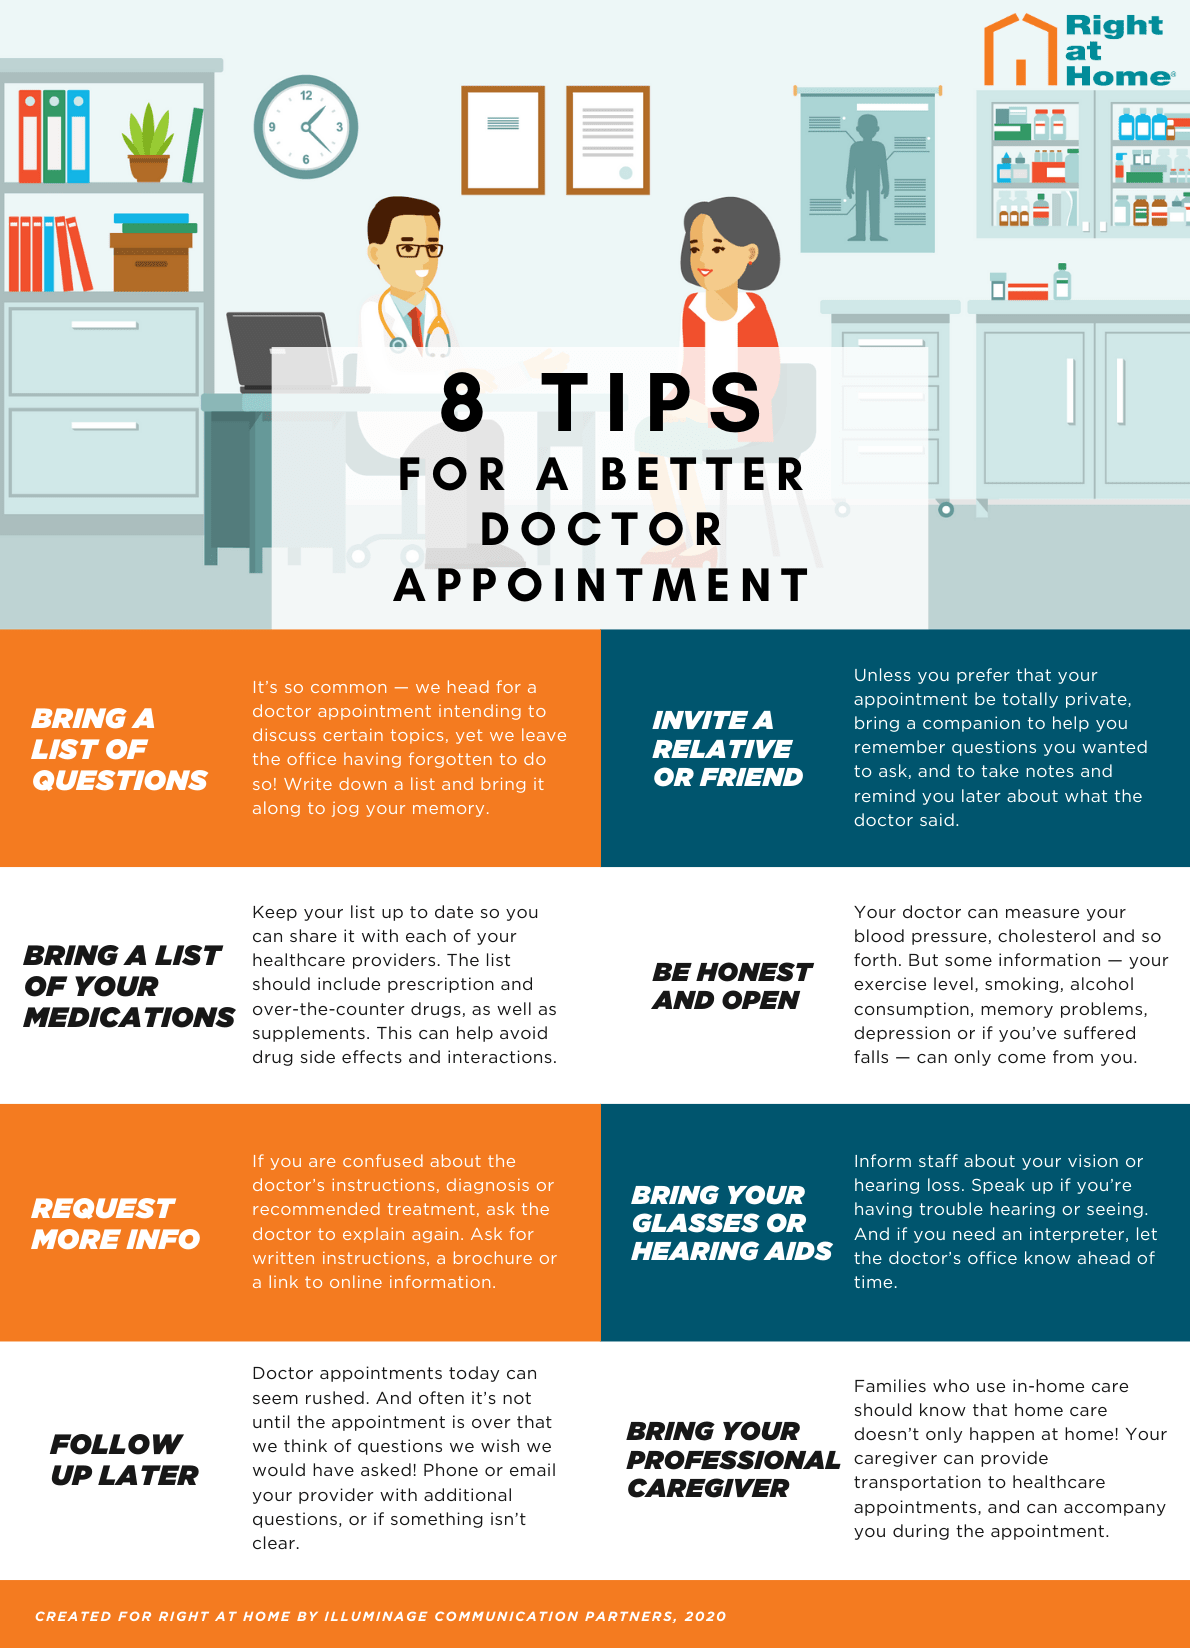 Infographic: 8 tips for a better doctor appointment